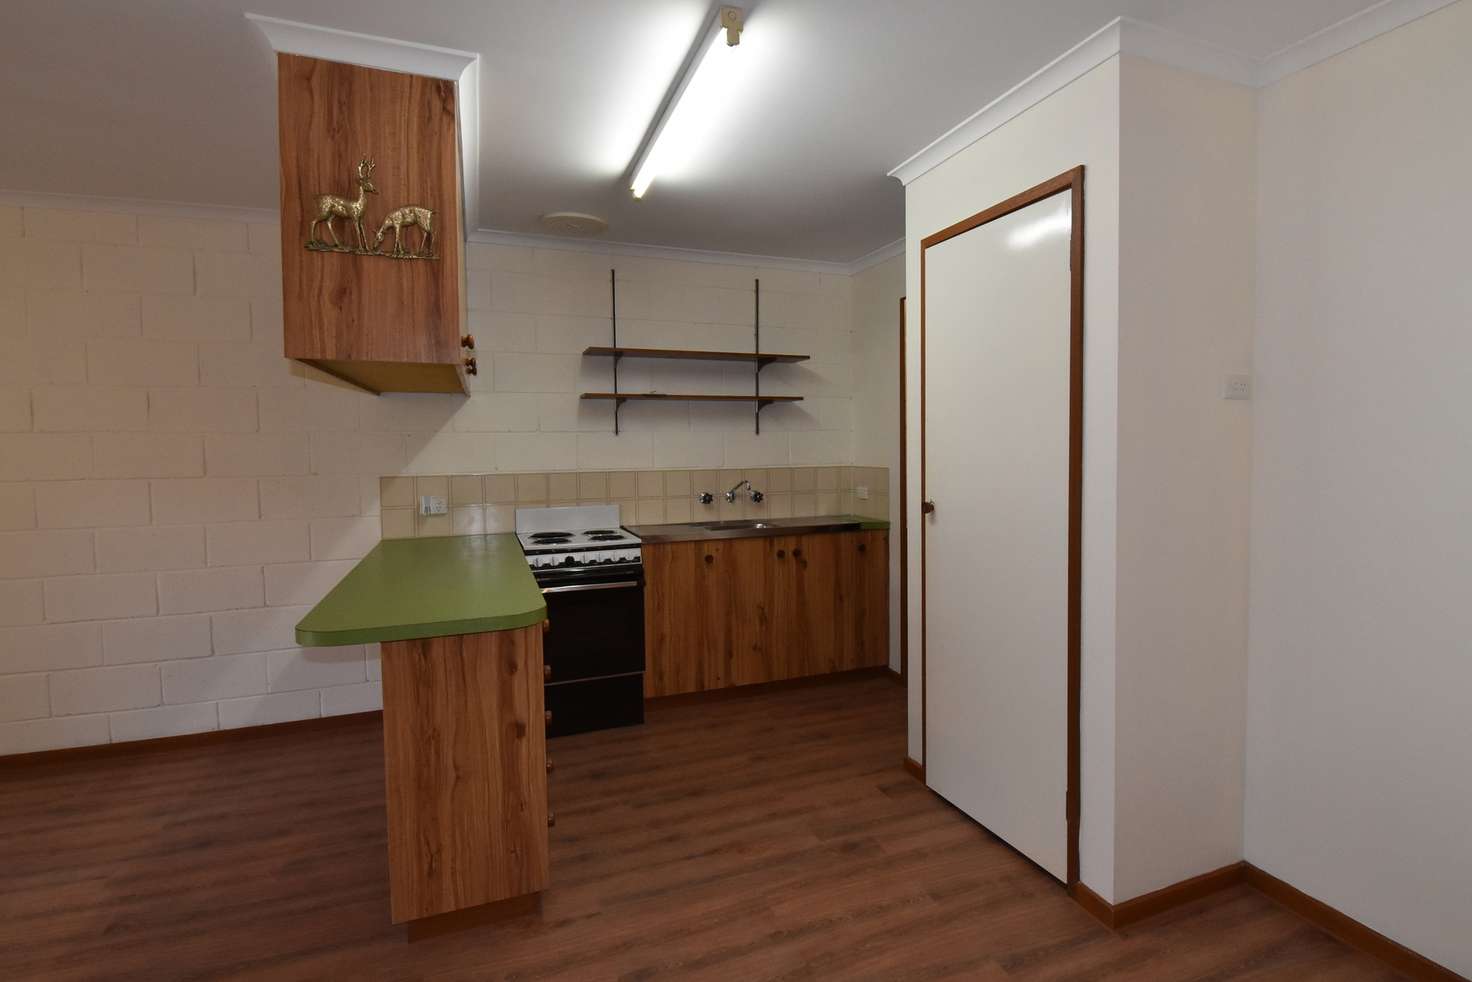 Main view of Homely unit listing, 4/612 Hague Street, Lavington NSW 2641